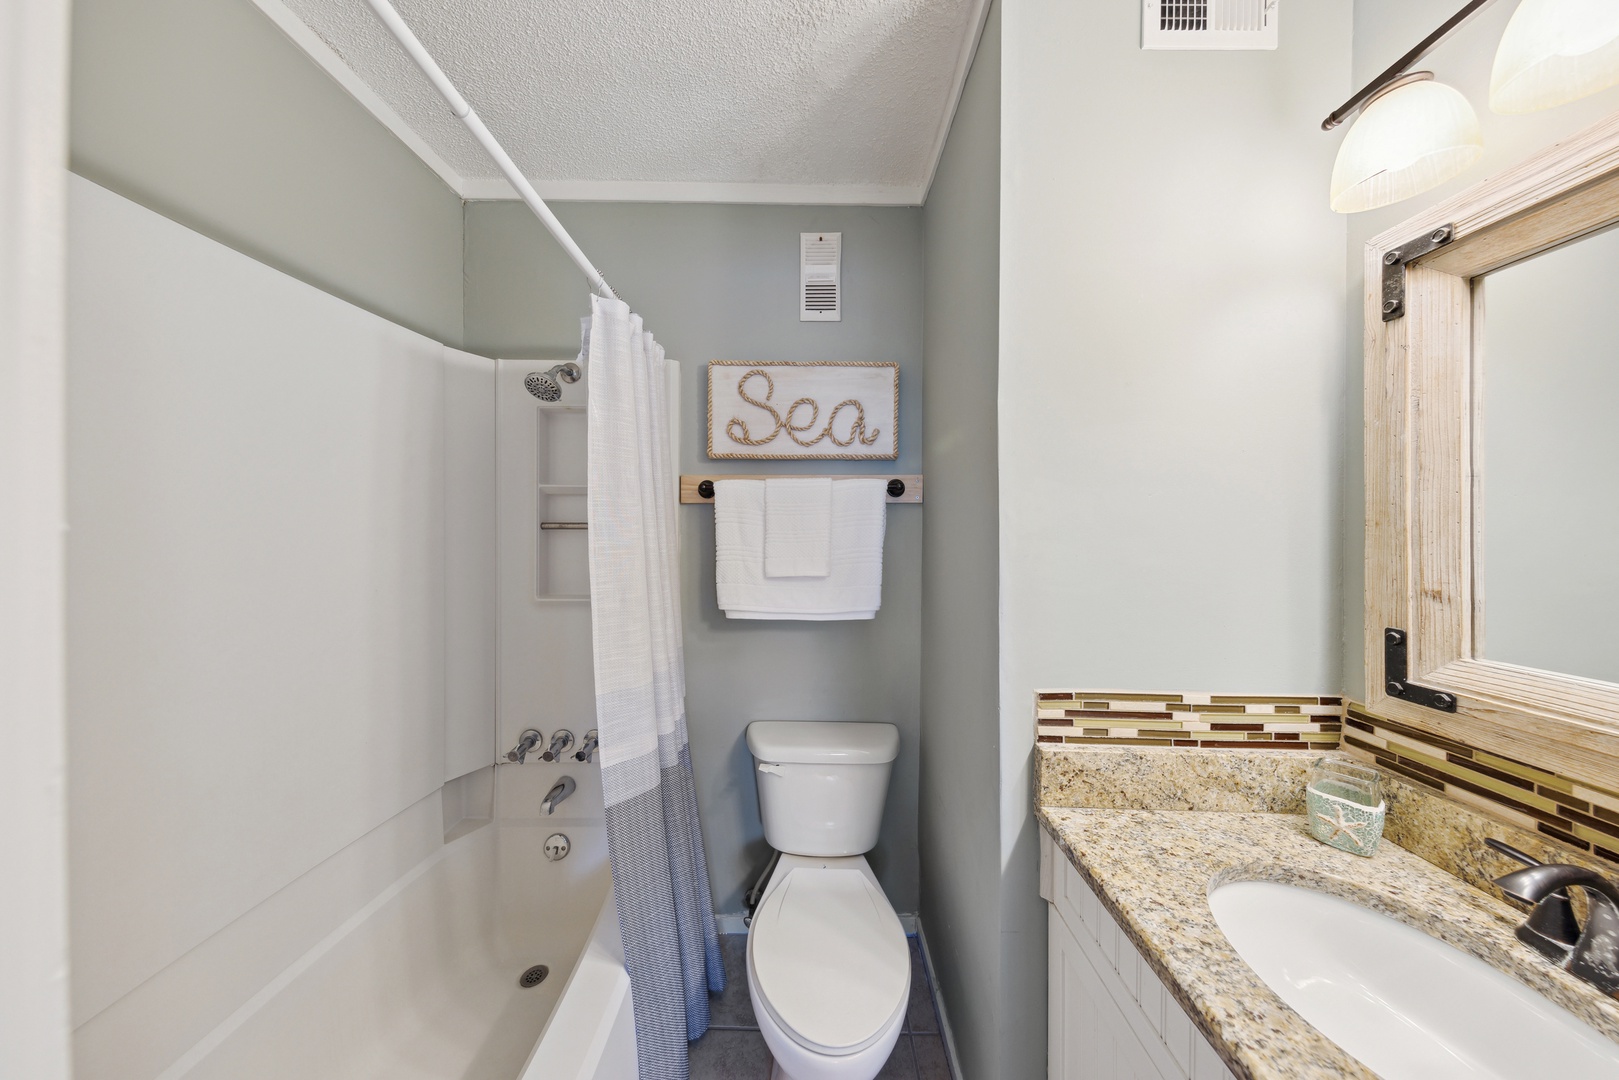 The queen ensuite bathroom includes a single vanity & shower/tub combo